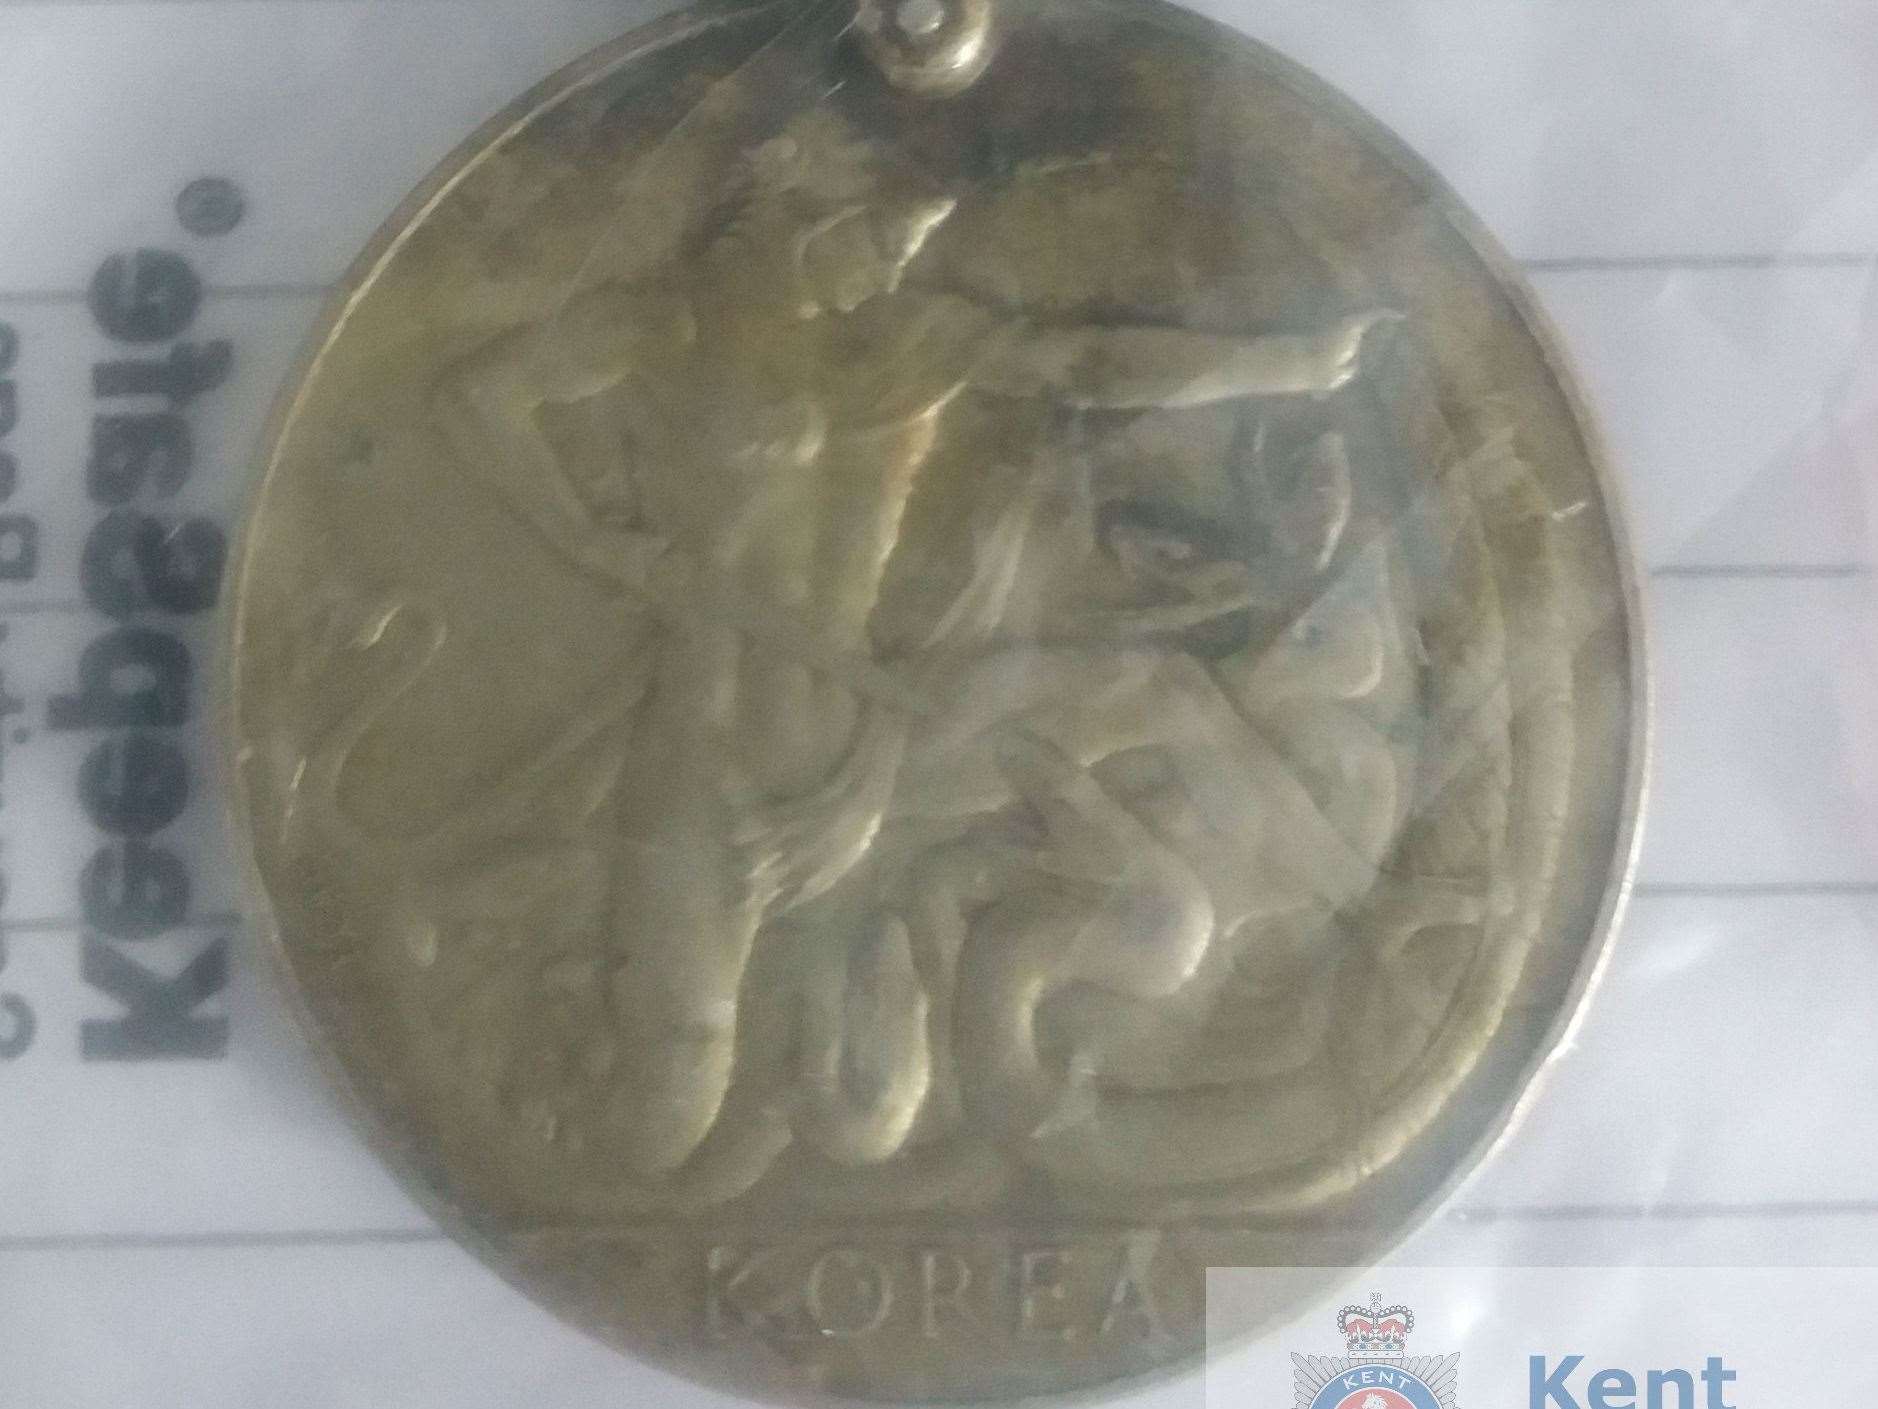 This Queen's Korean Medal is suspected to have been burgled